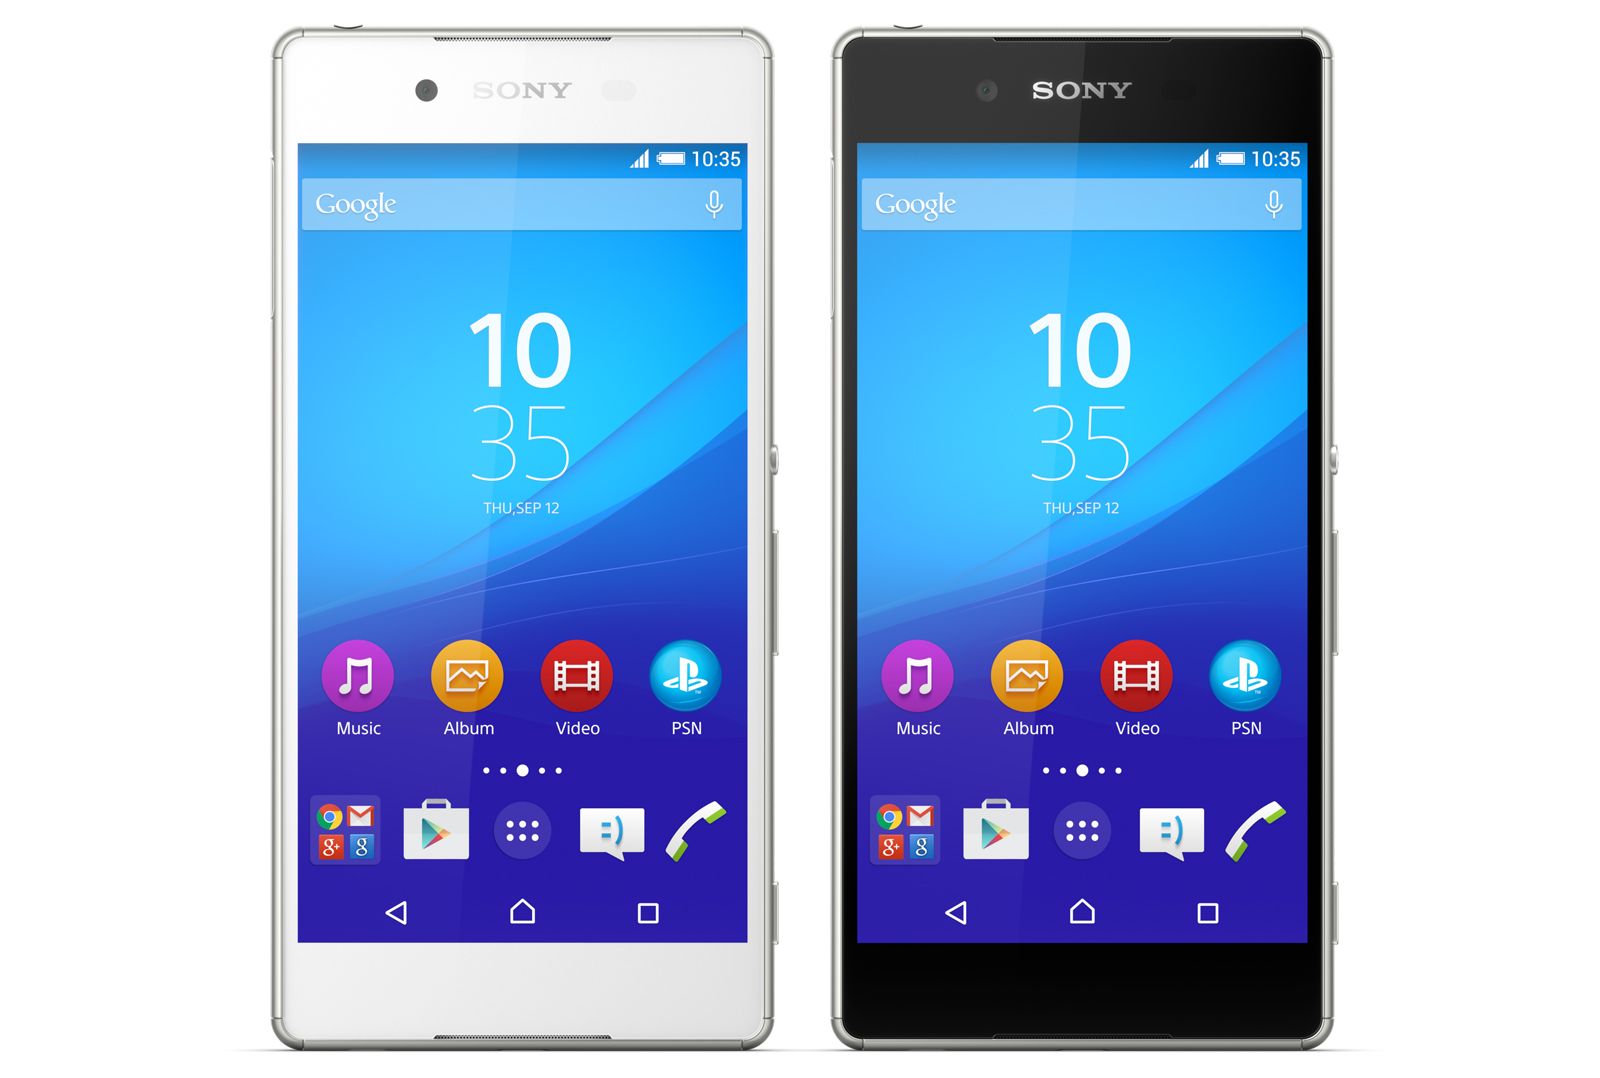 sony xperia z4 isn t sony s new global flagship the xperia z3 might be image 1